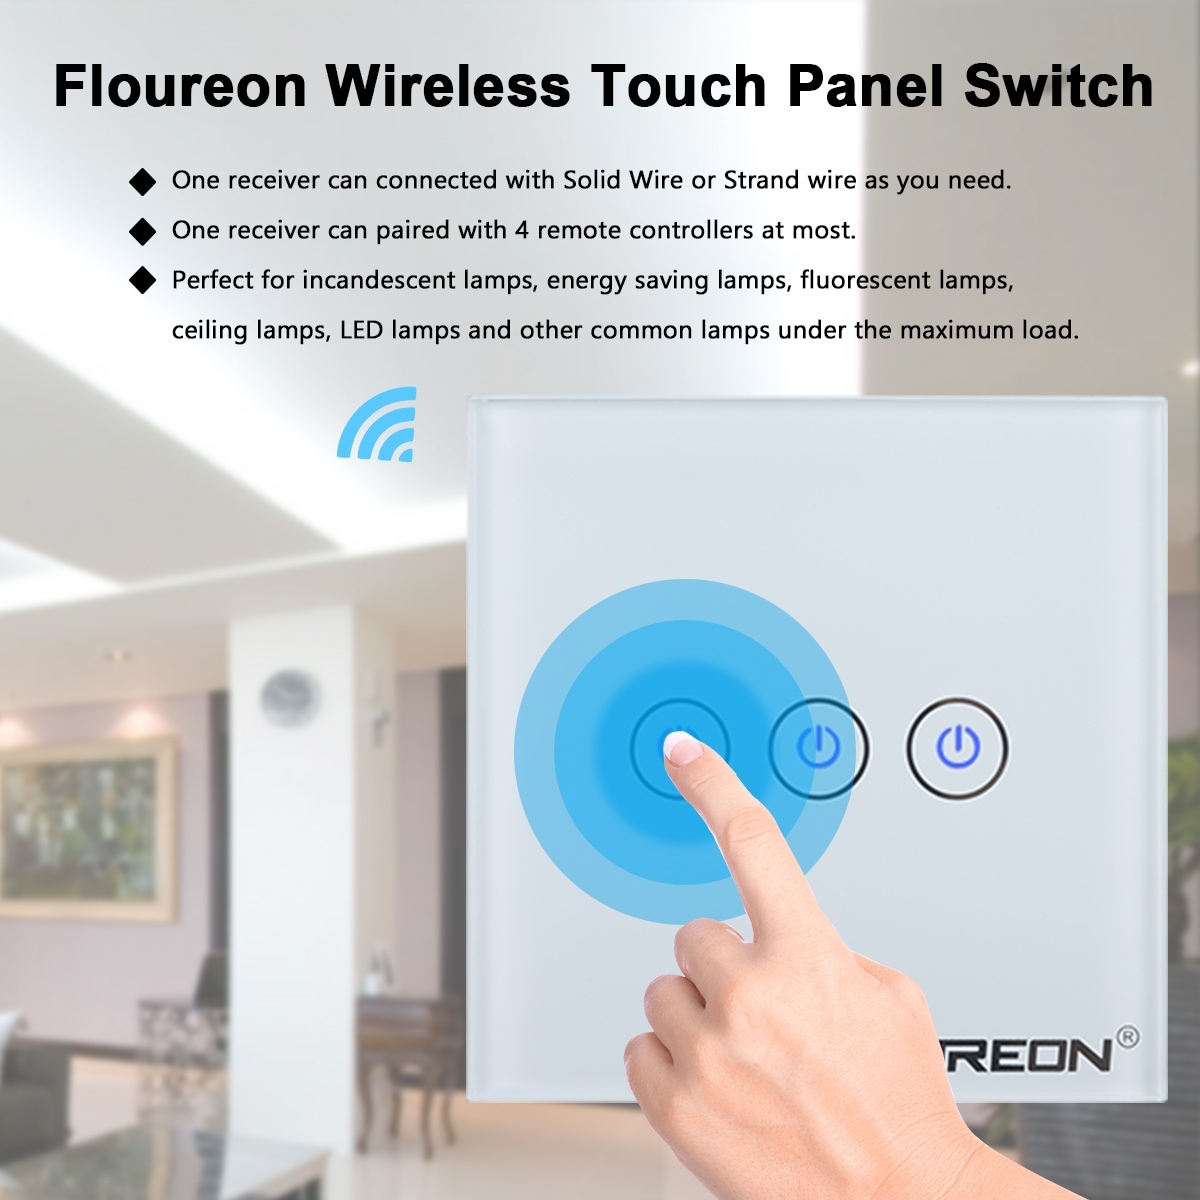 https://ak1.ostkcdn.com/images/products/is/images/direct/9e7ae3a3c7a6f7112c13e41601002a828cde8b3e/Floureon-3-Gang-1-Way-Wireless-RF-Remote-Control-Light-Switch-433.92MHz-Remote-Controller-Portable-Switch.jpg